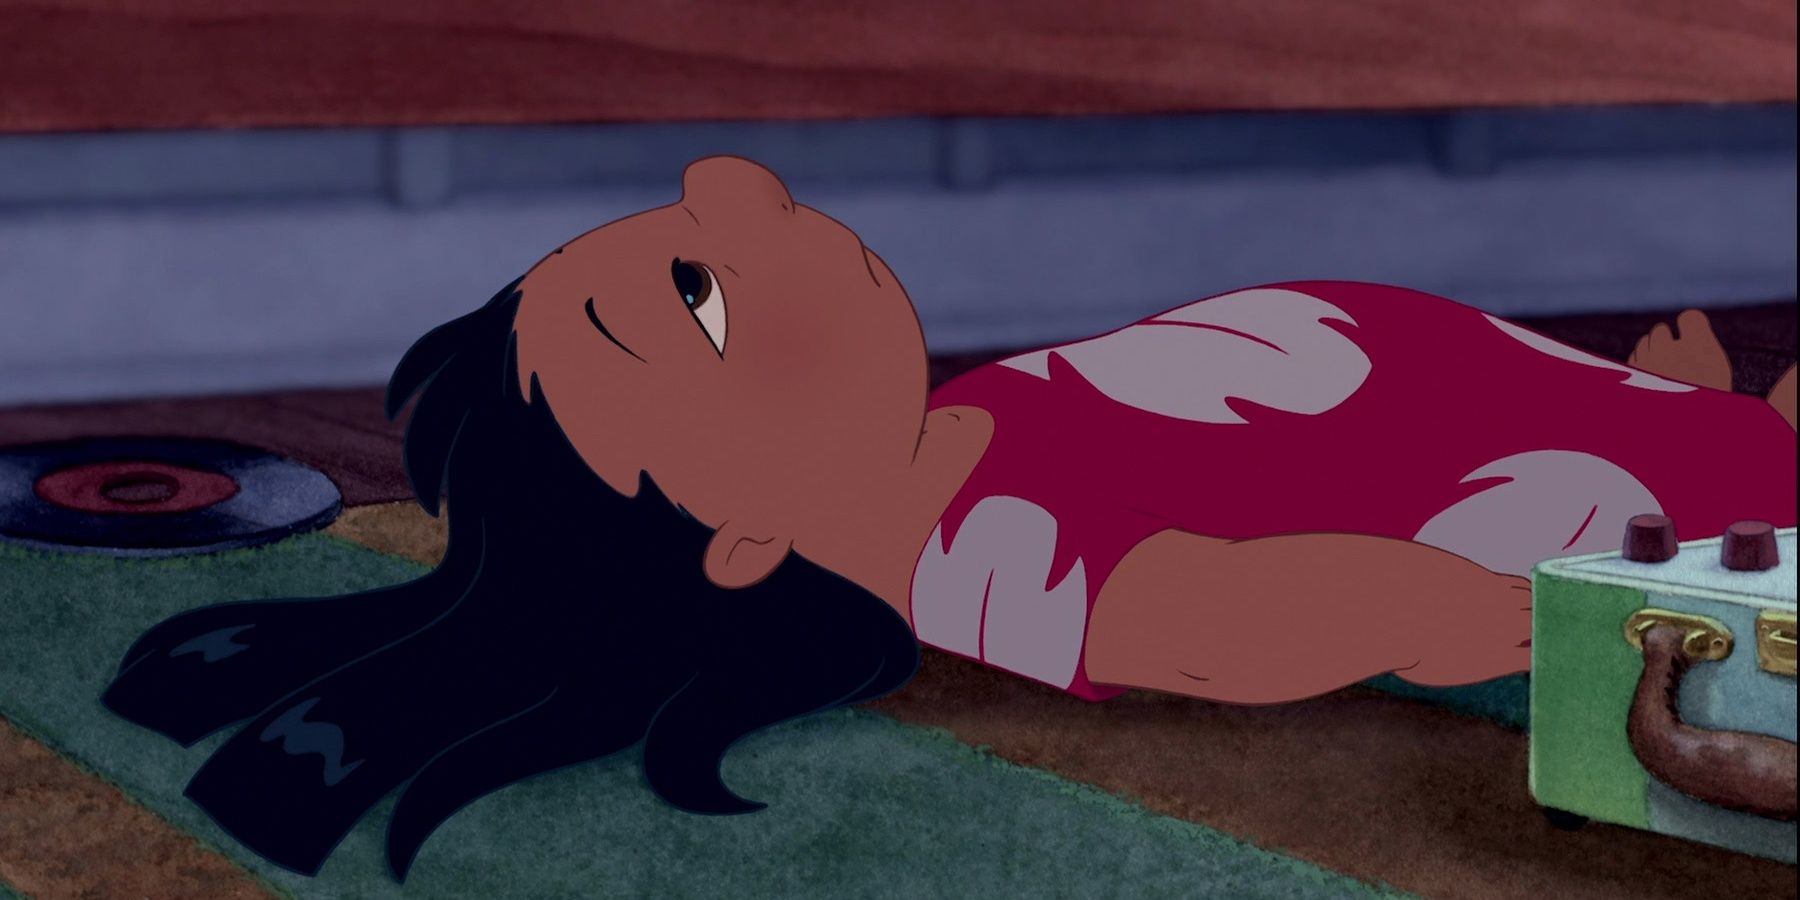 Lilo laying down listening to a record in Lilo & Stitch 